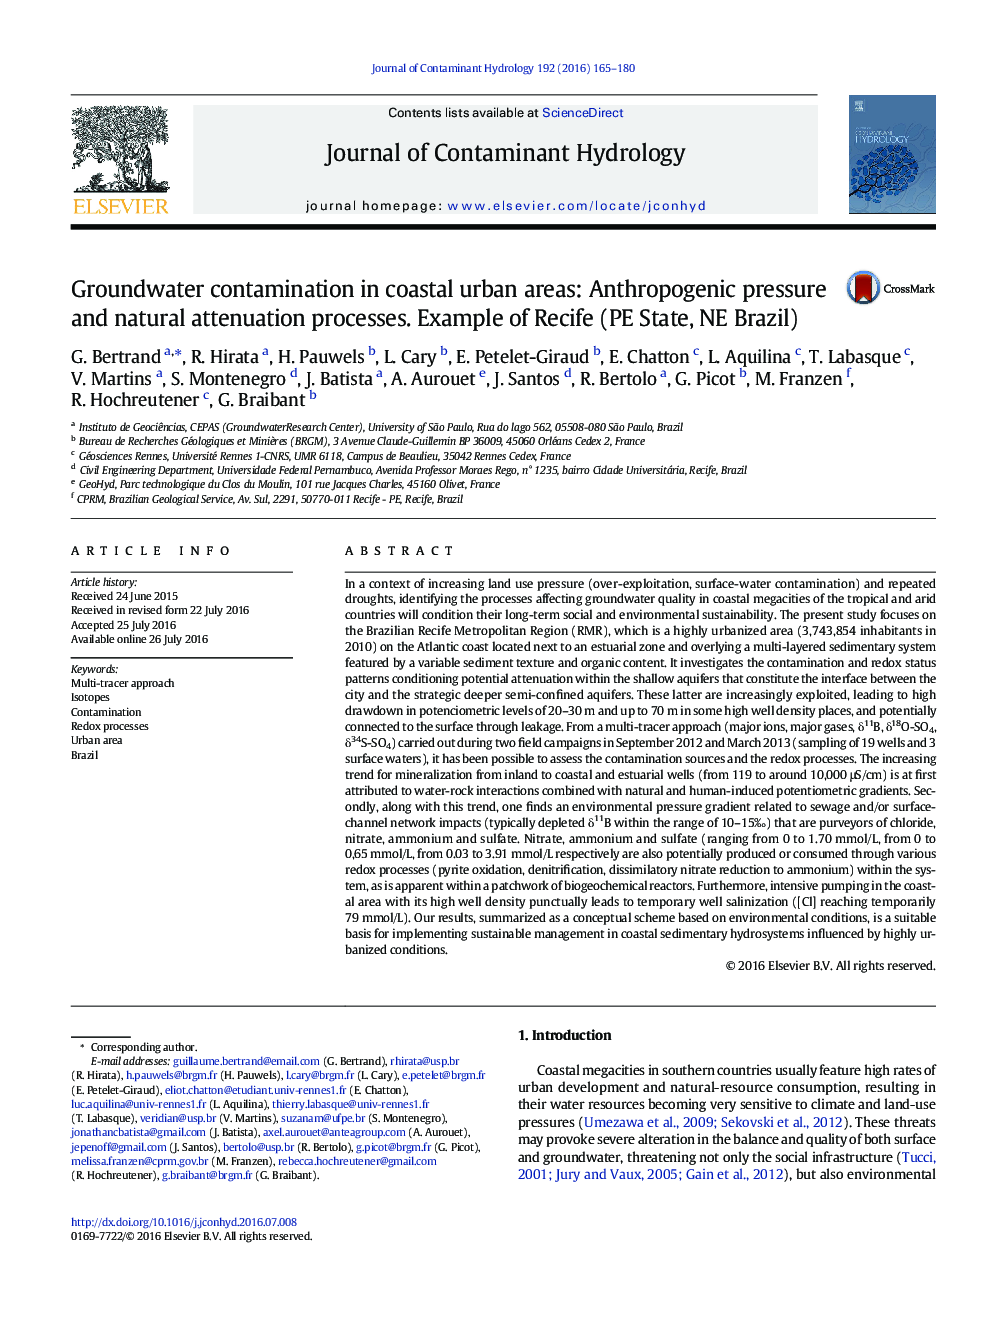 Groundwater contamination in coastal urban areas: Anthropogenic pressure and natural attenuation processes. Example of Recife (PE State, NE Brazil)